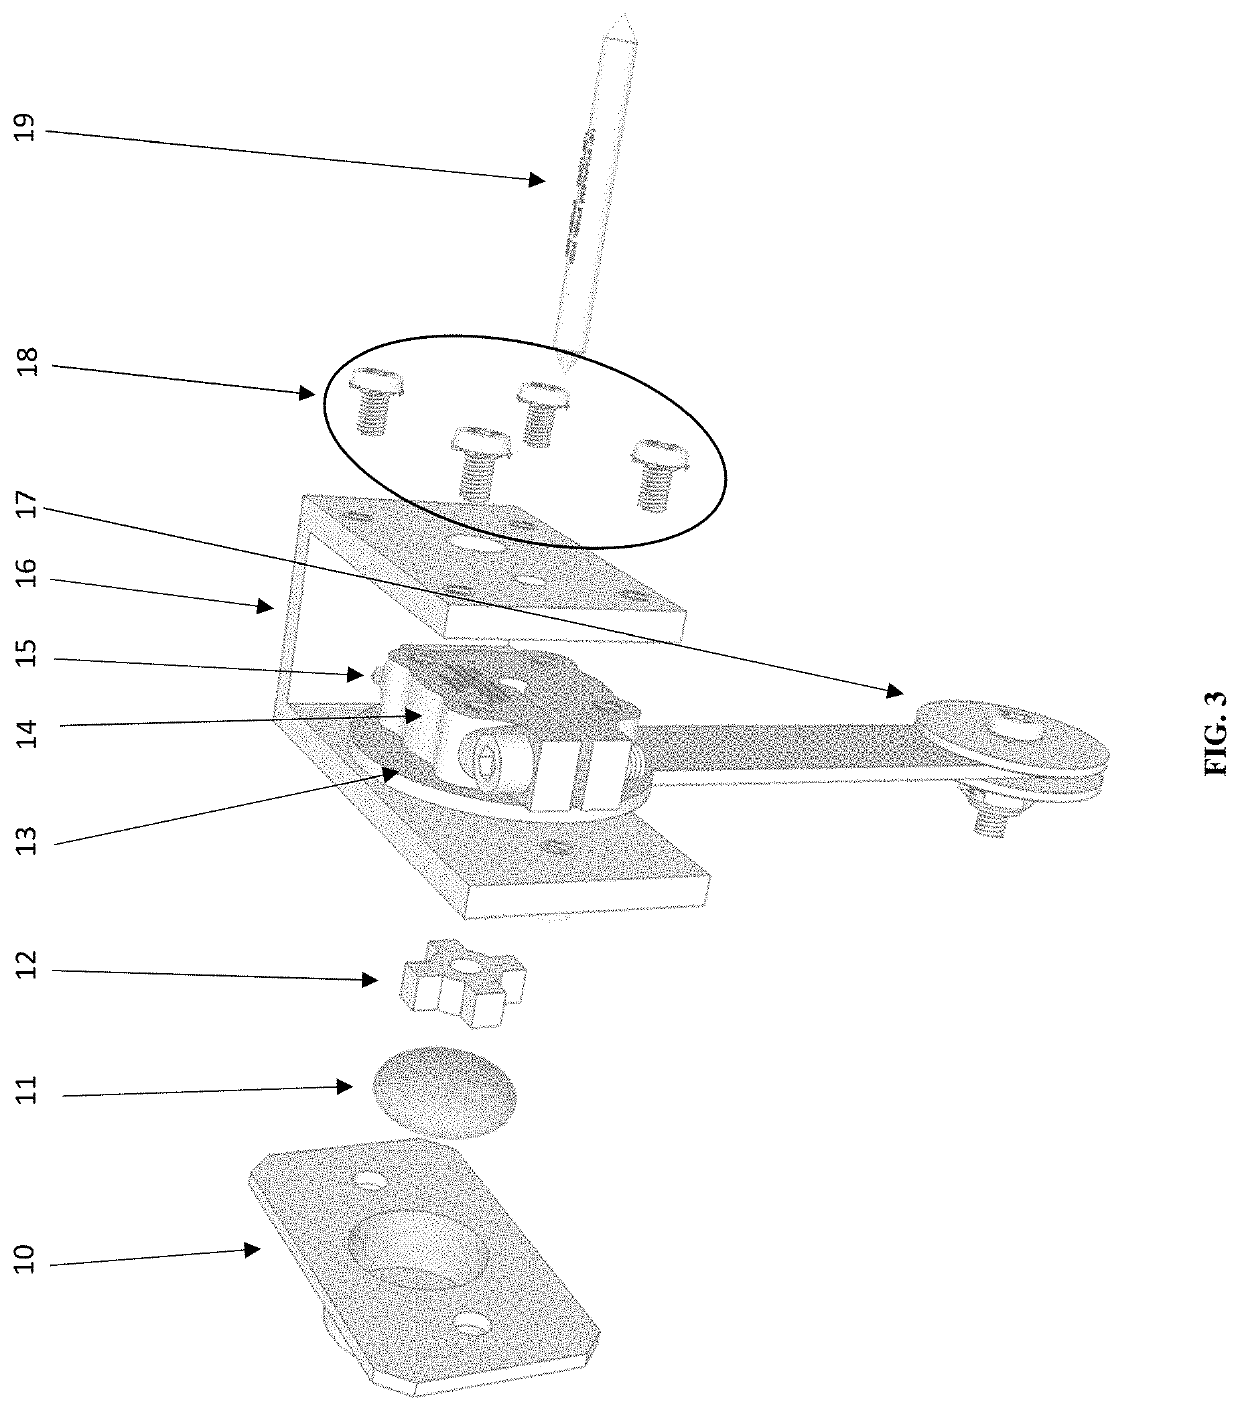 Universal automatic self-leveling mechanism for motorized chair seats